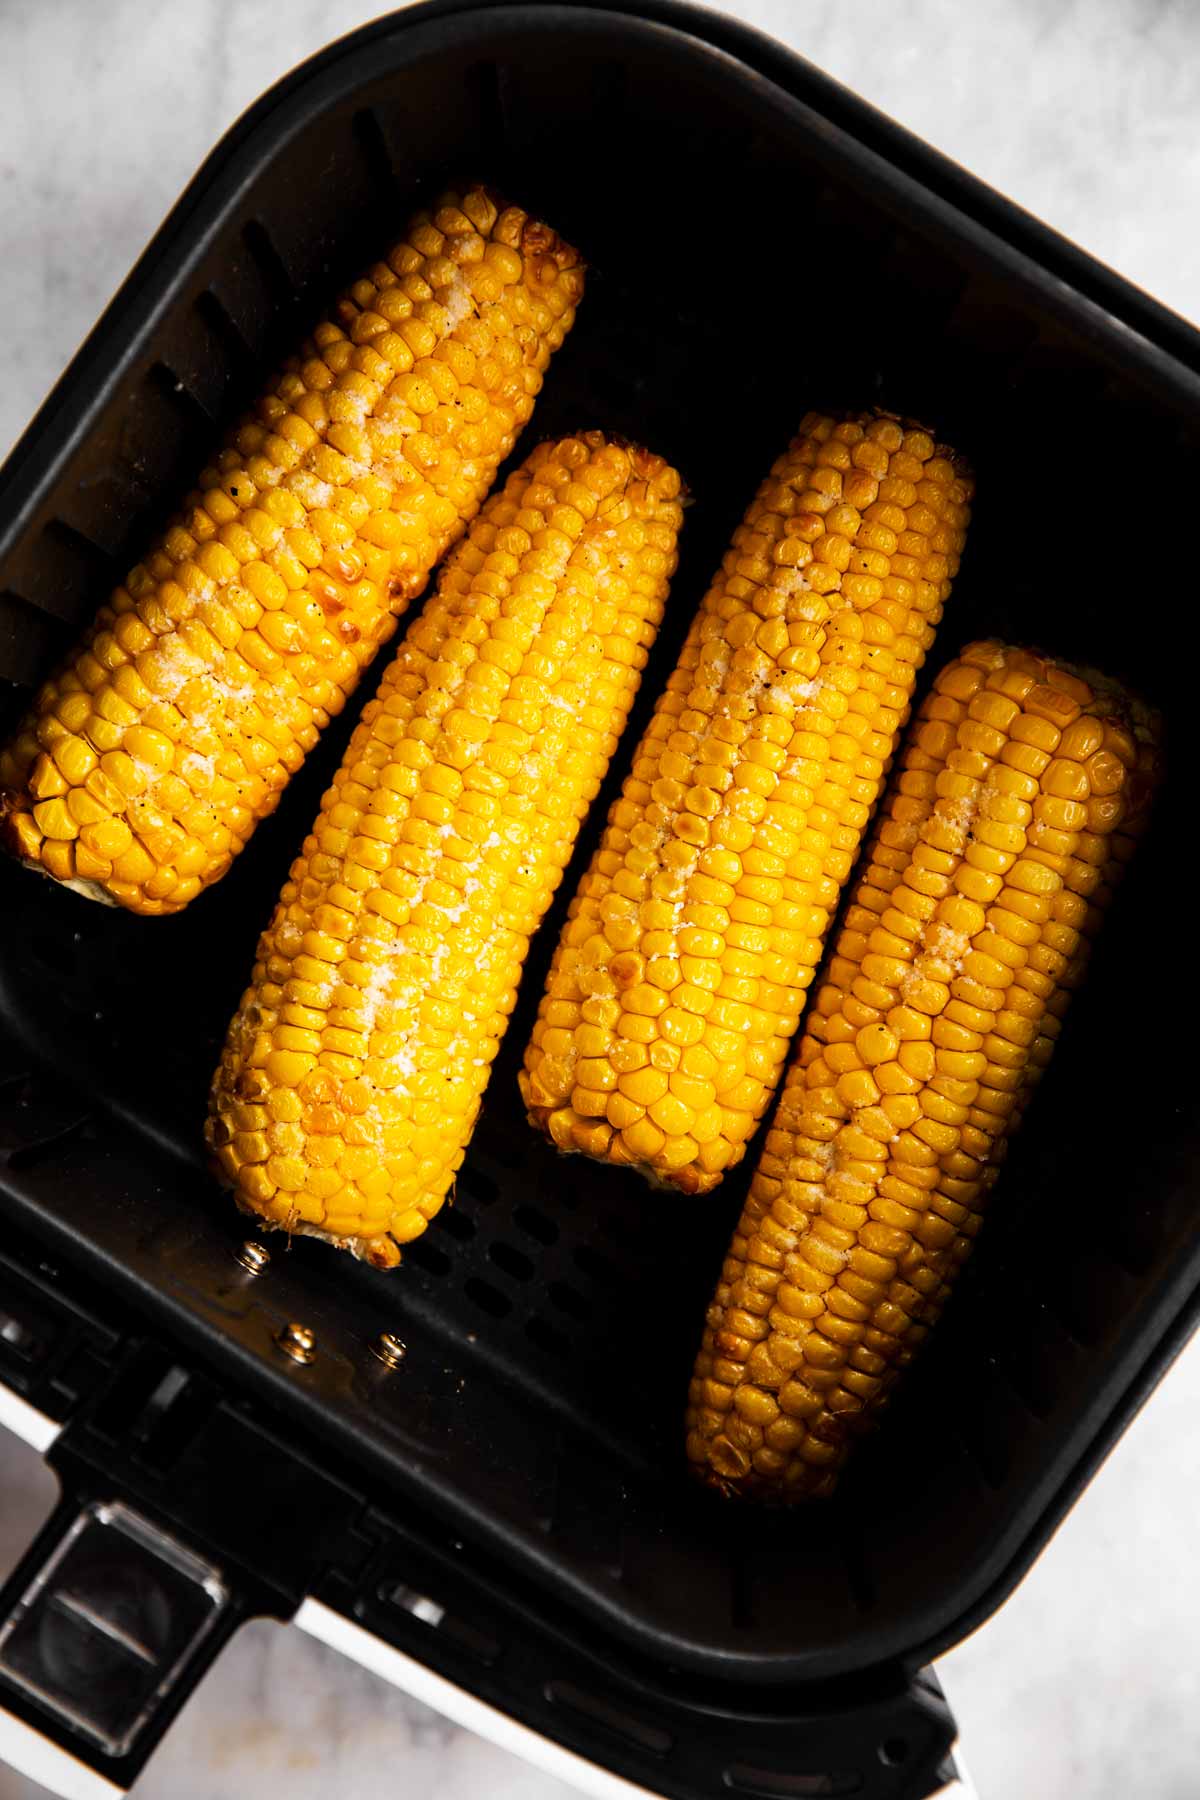 four cooked ears of corn in air fryer basket